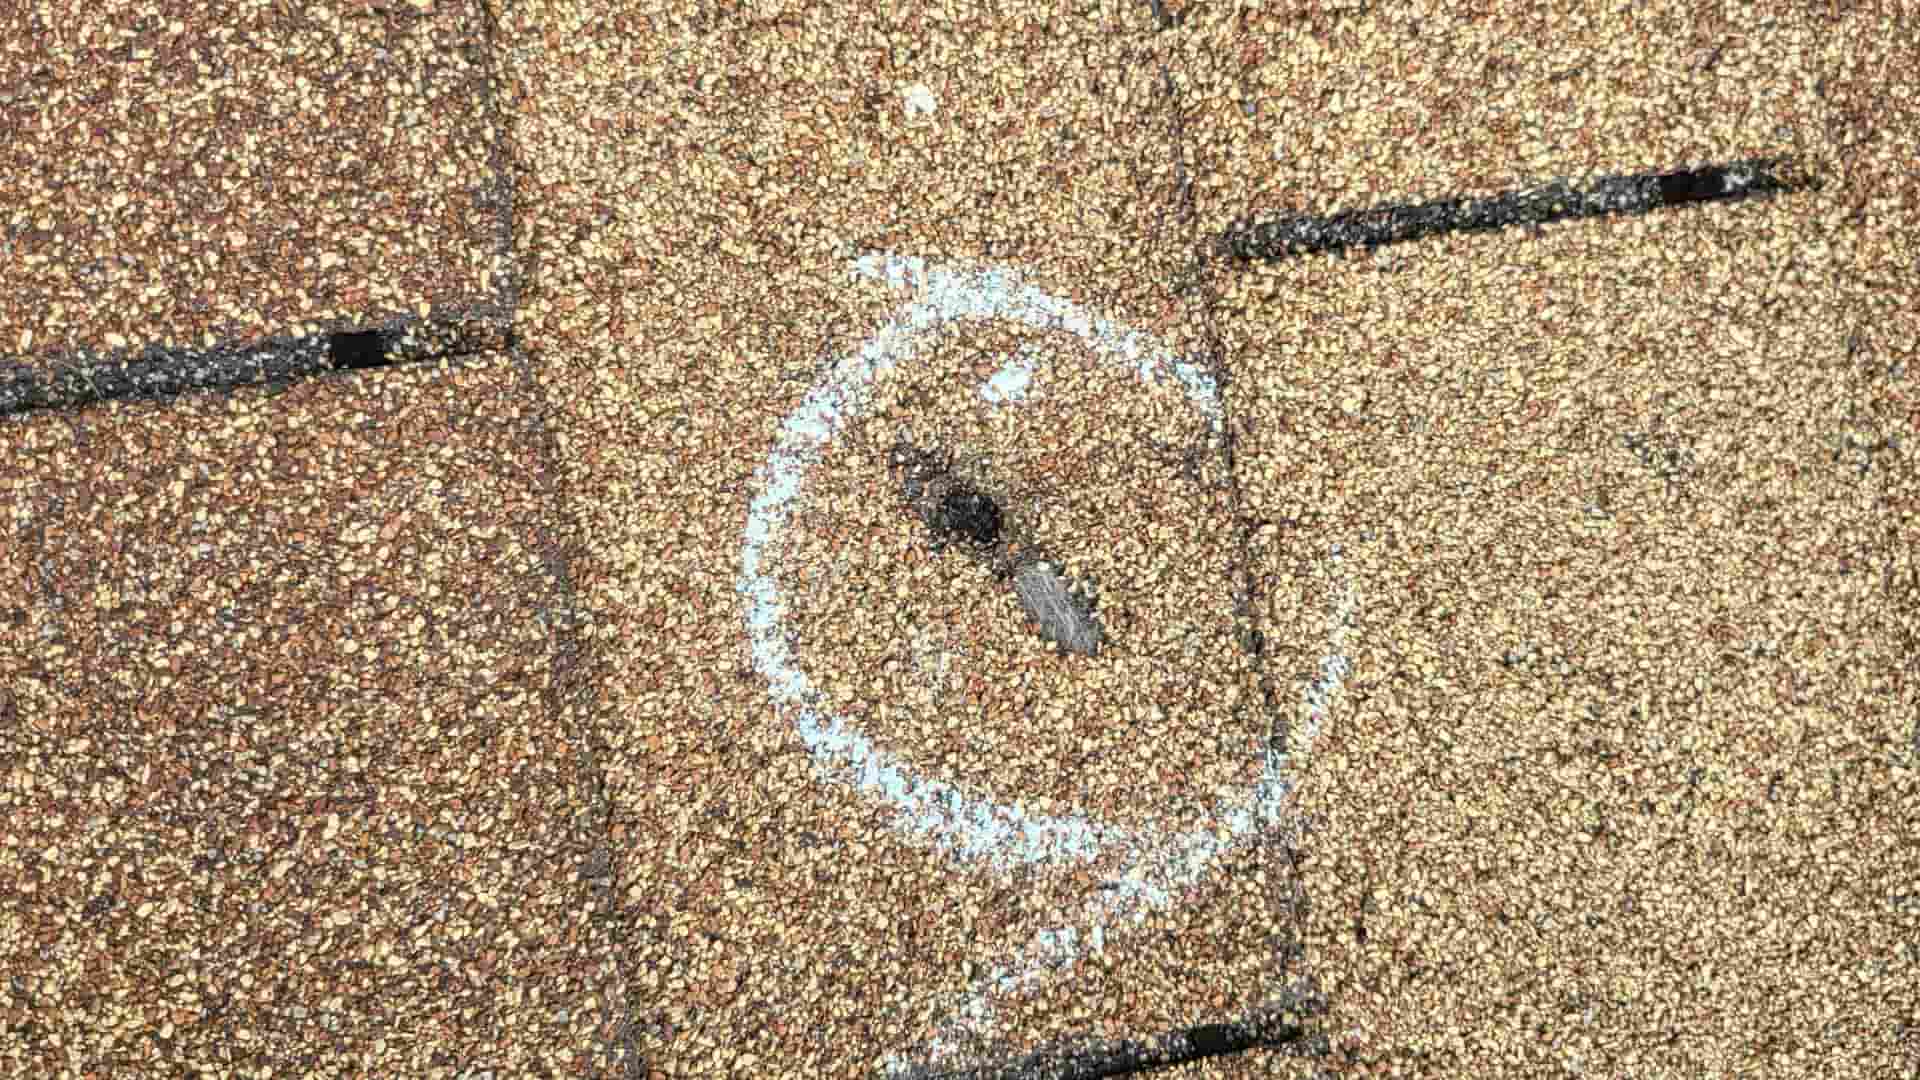 An image of a spot on a roof that may be damaged in a hail storm.